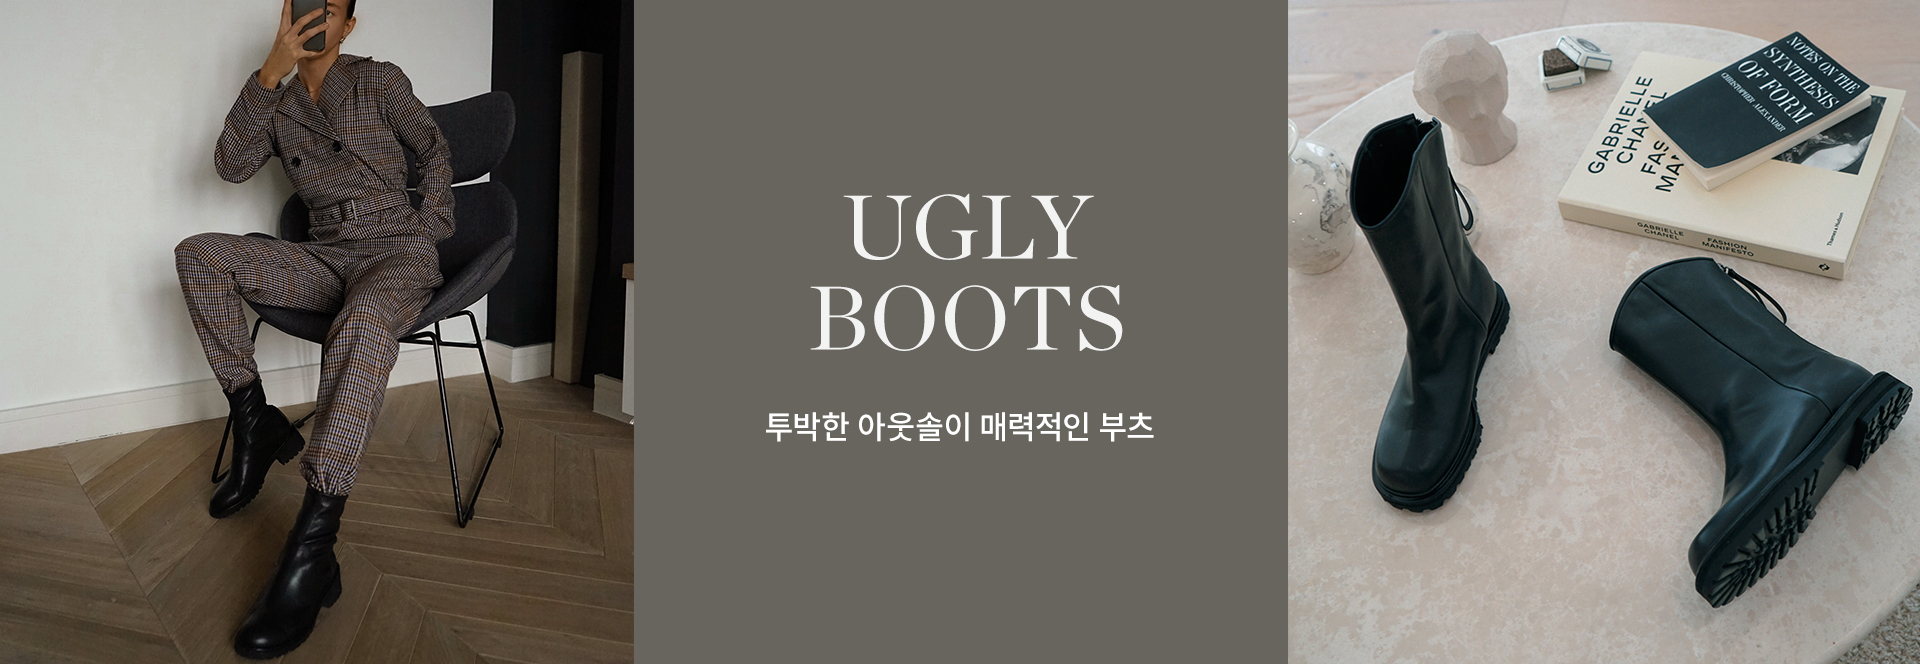 Ugly boots